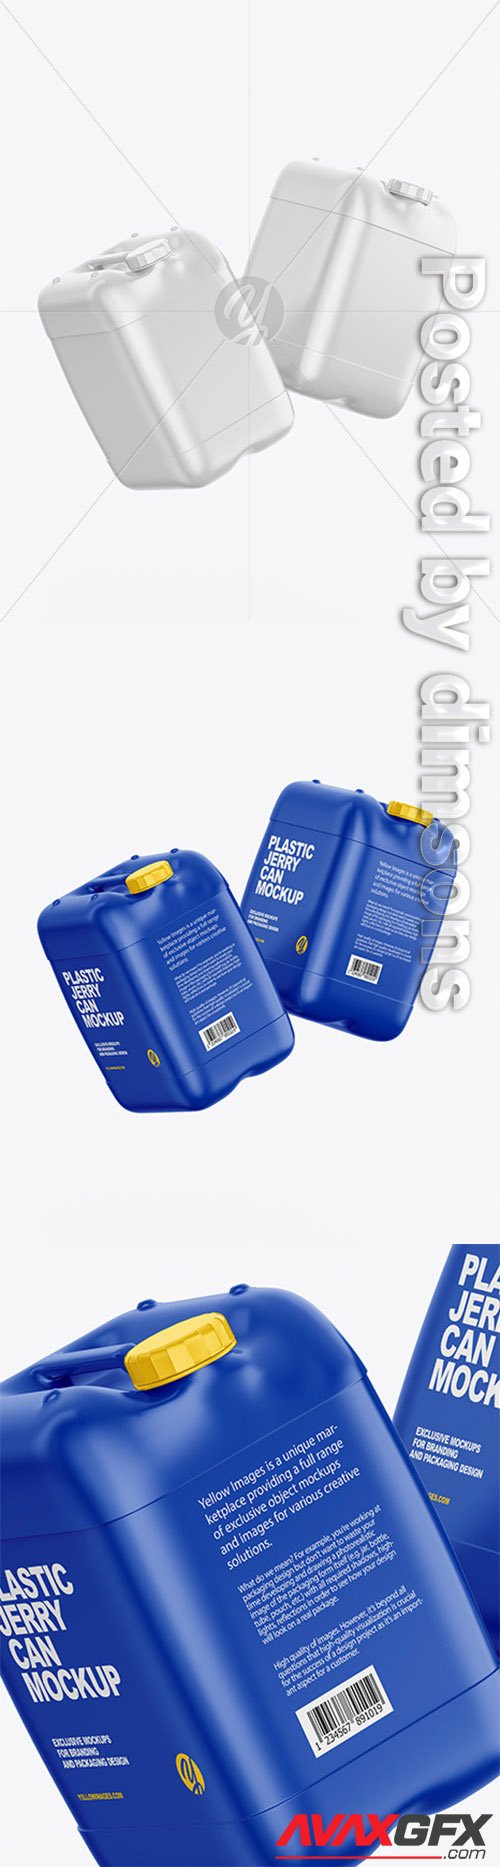 Two Plastic Jerry Cans Mockup 63206